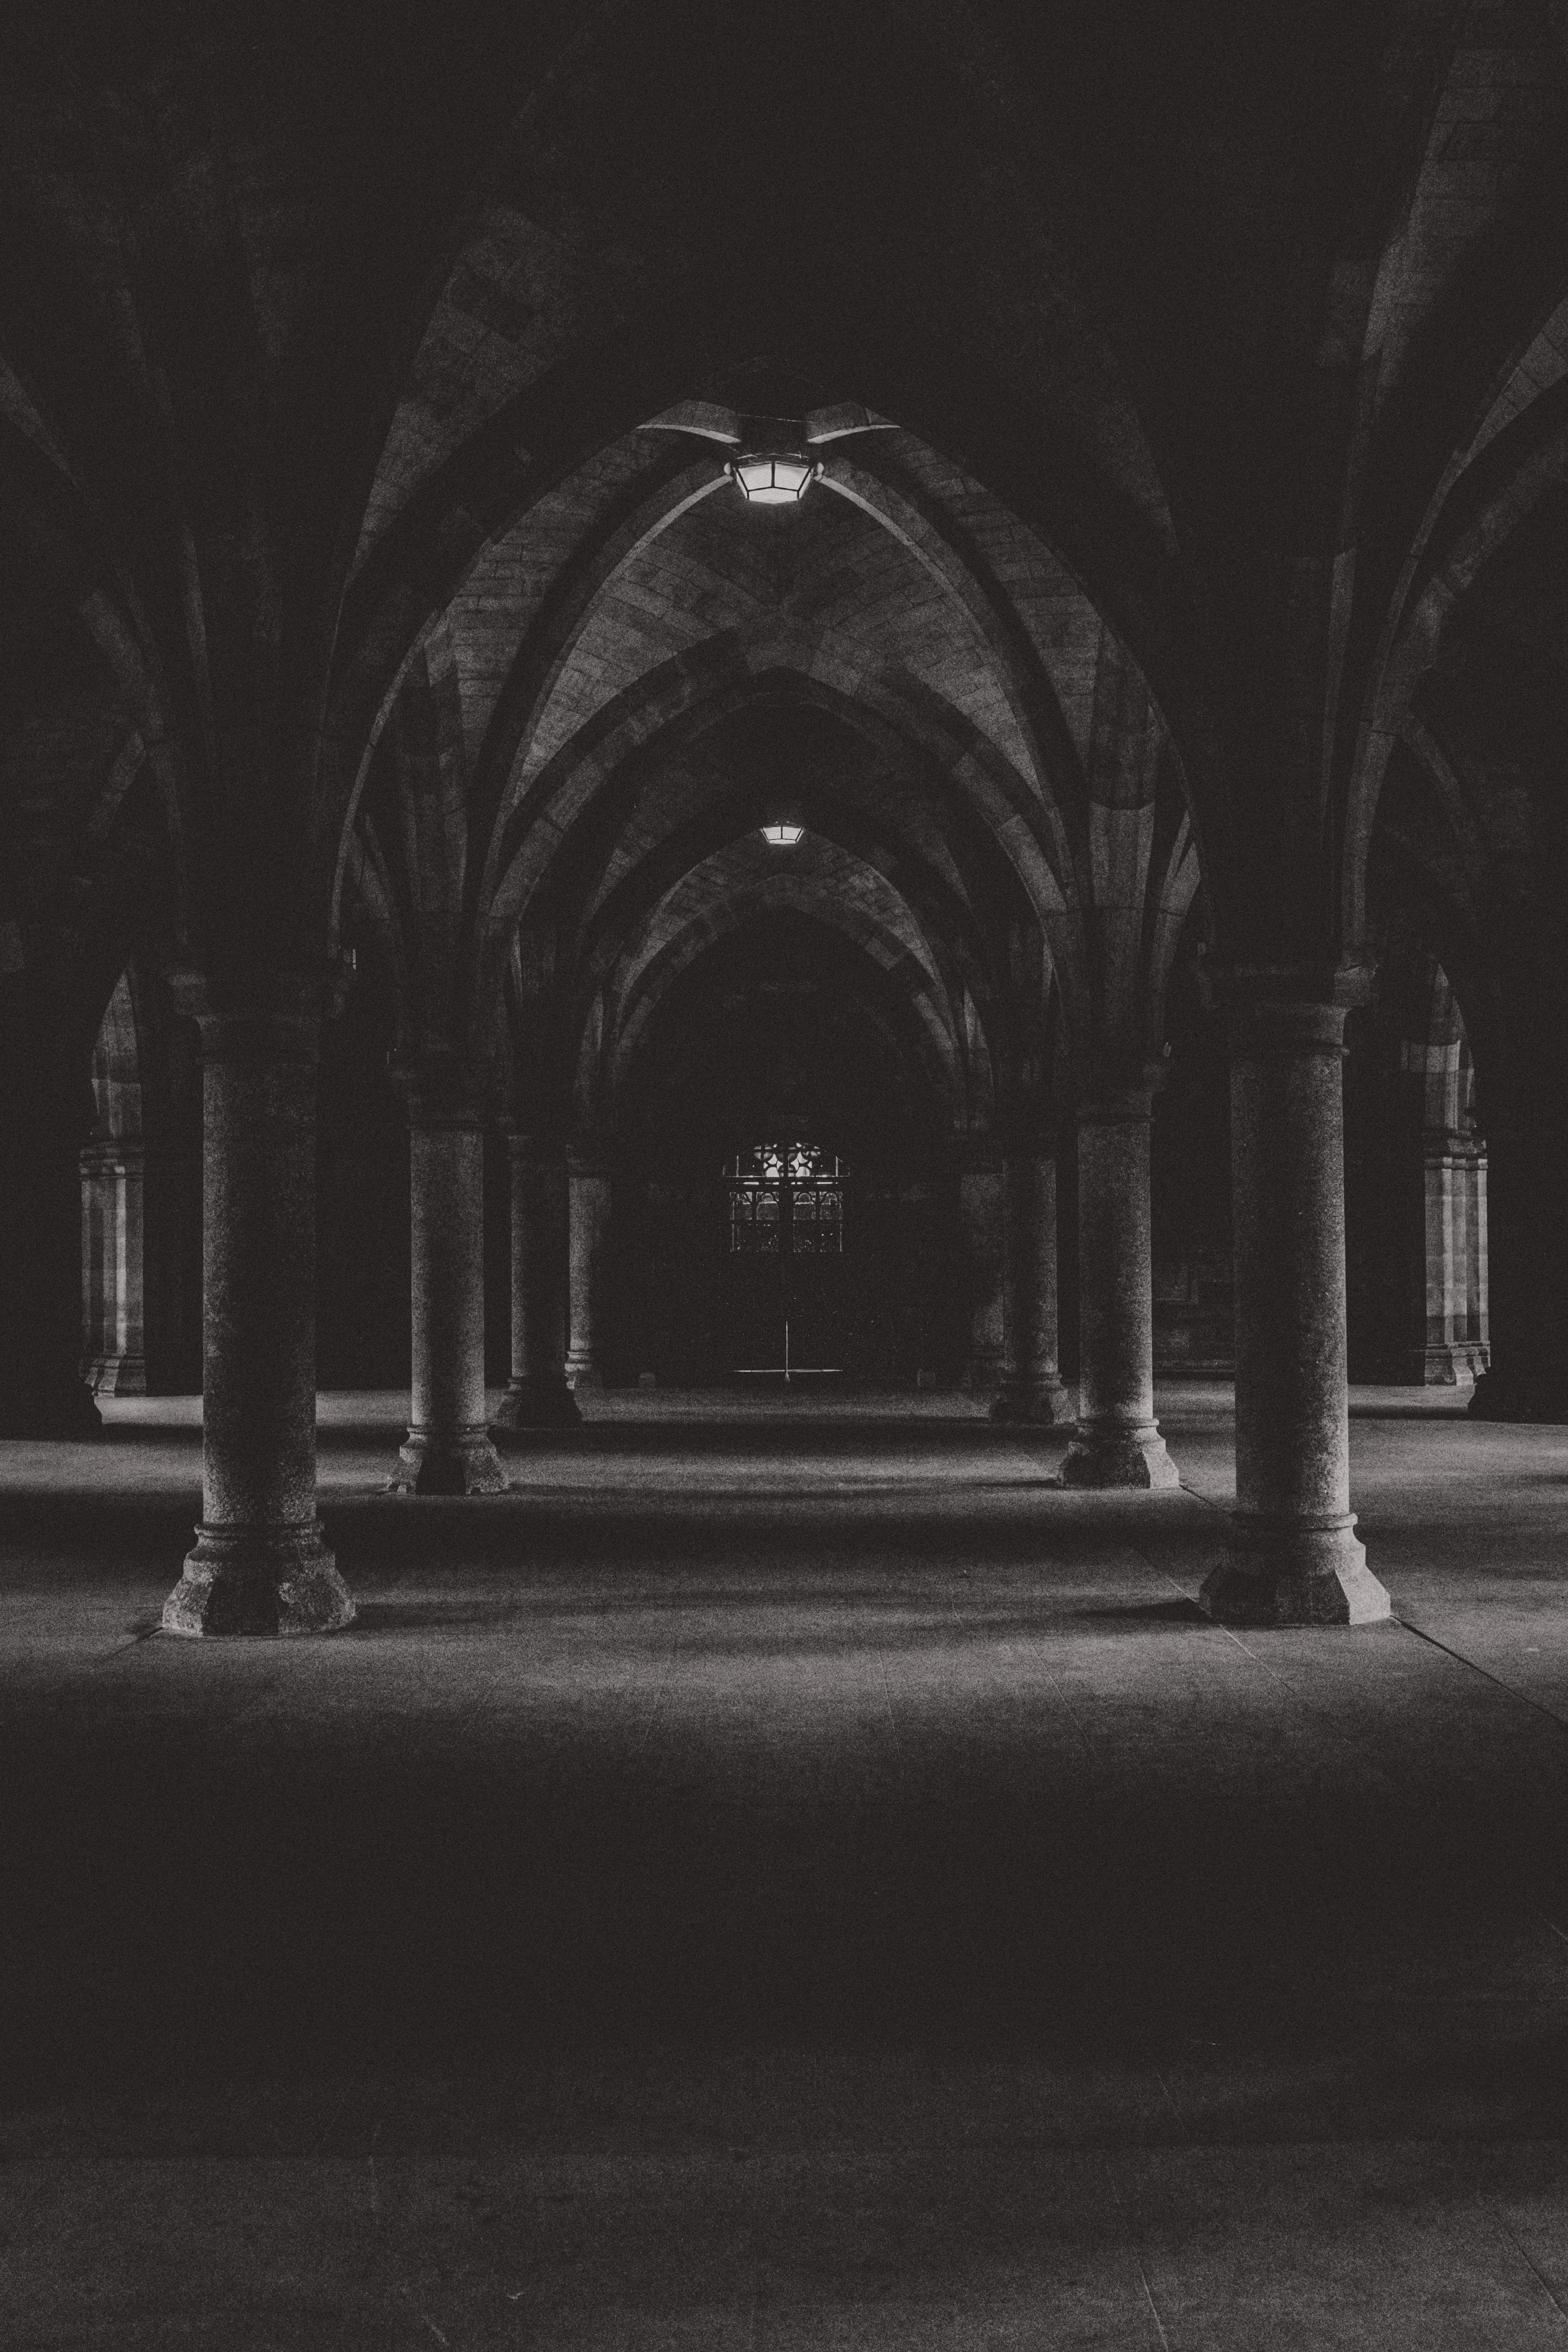 University of Glasgow Cloisters - Notice the Space